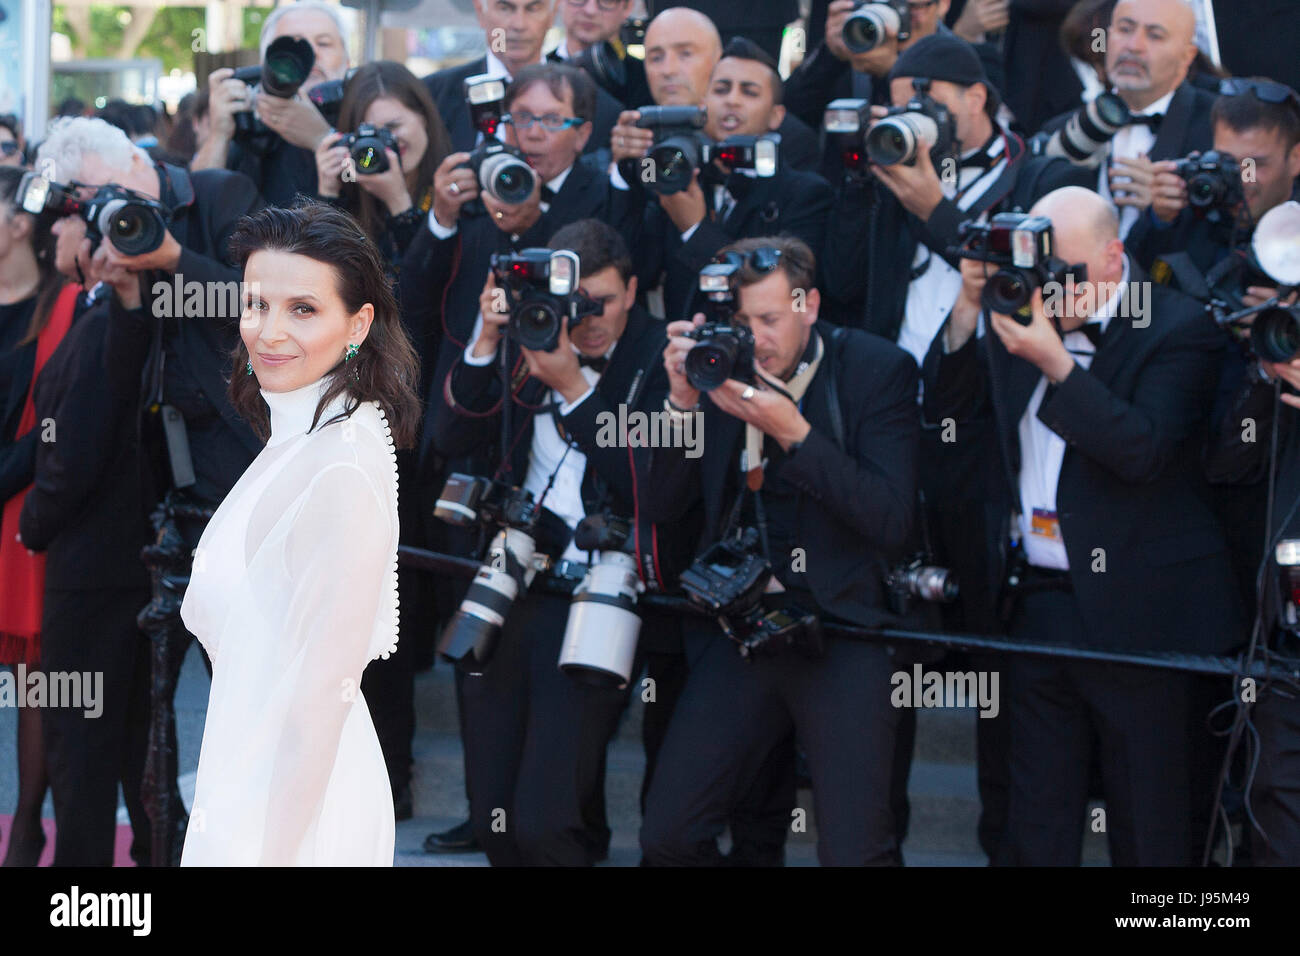 CANNES, FRANCE - MAY 19: Juliette Binoche attends the 'Okja' screening during the 70th annual Cannes Film Festival at Palais des Festivals on May 19, 2017 in Cannes, France.  Laurent Koffel/Alamy Live News Stock Photo